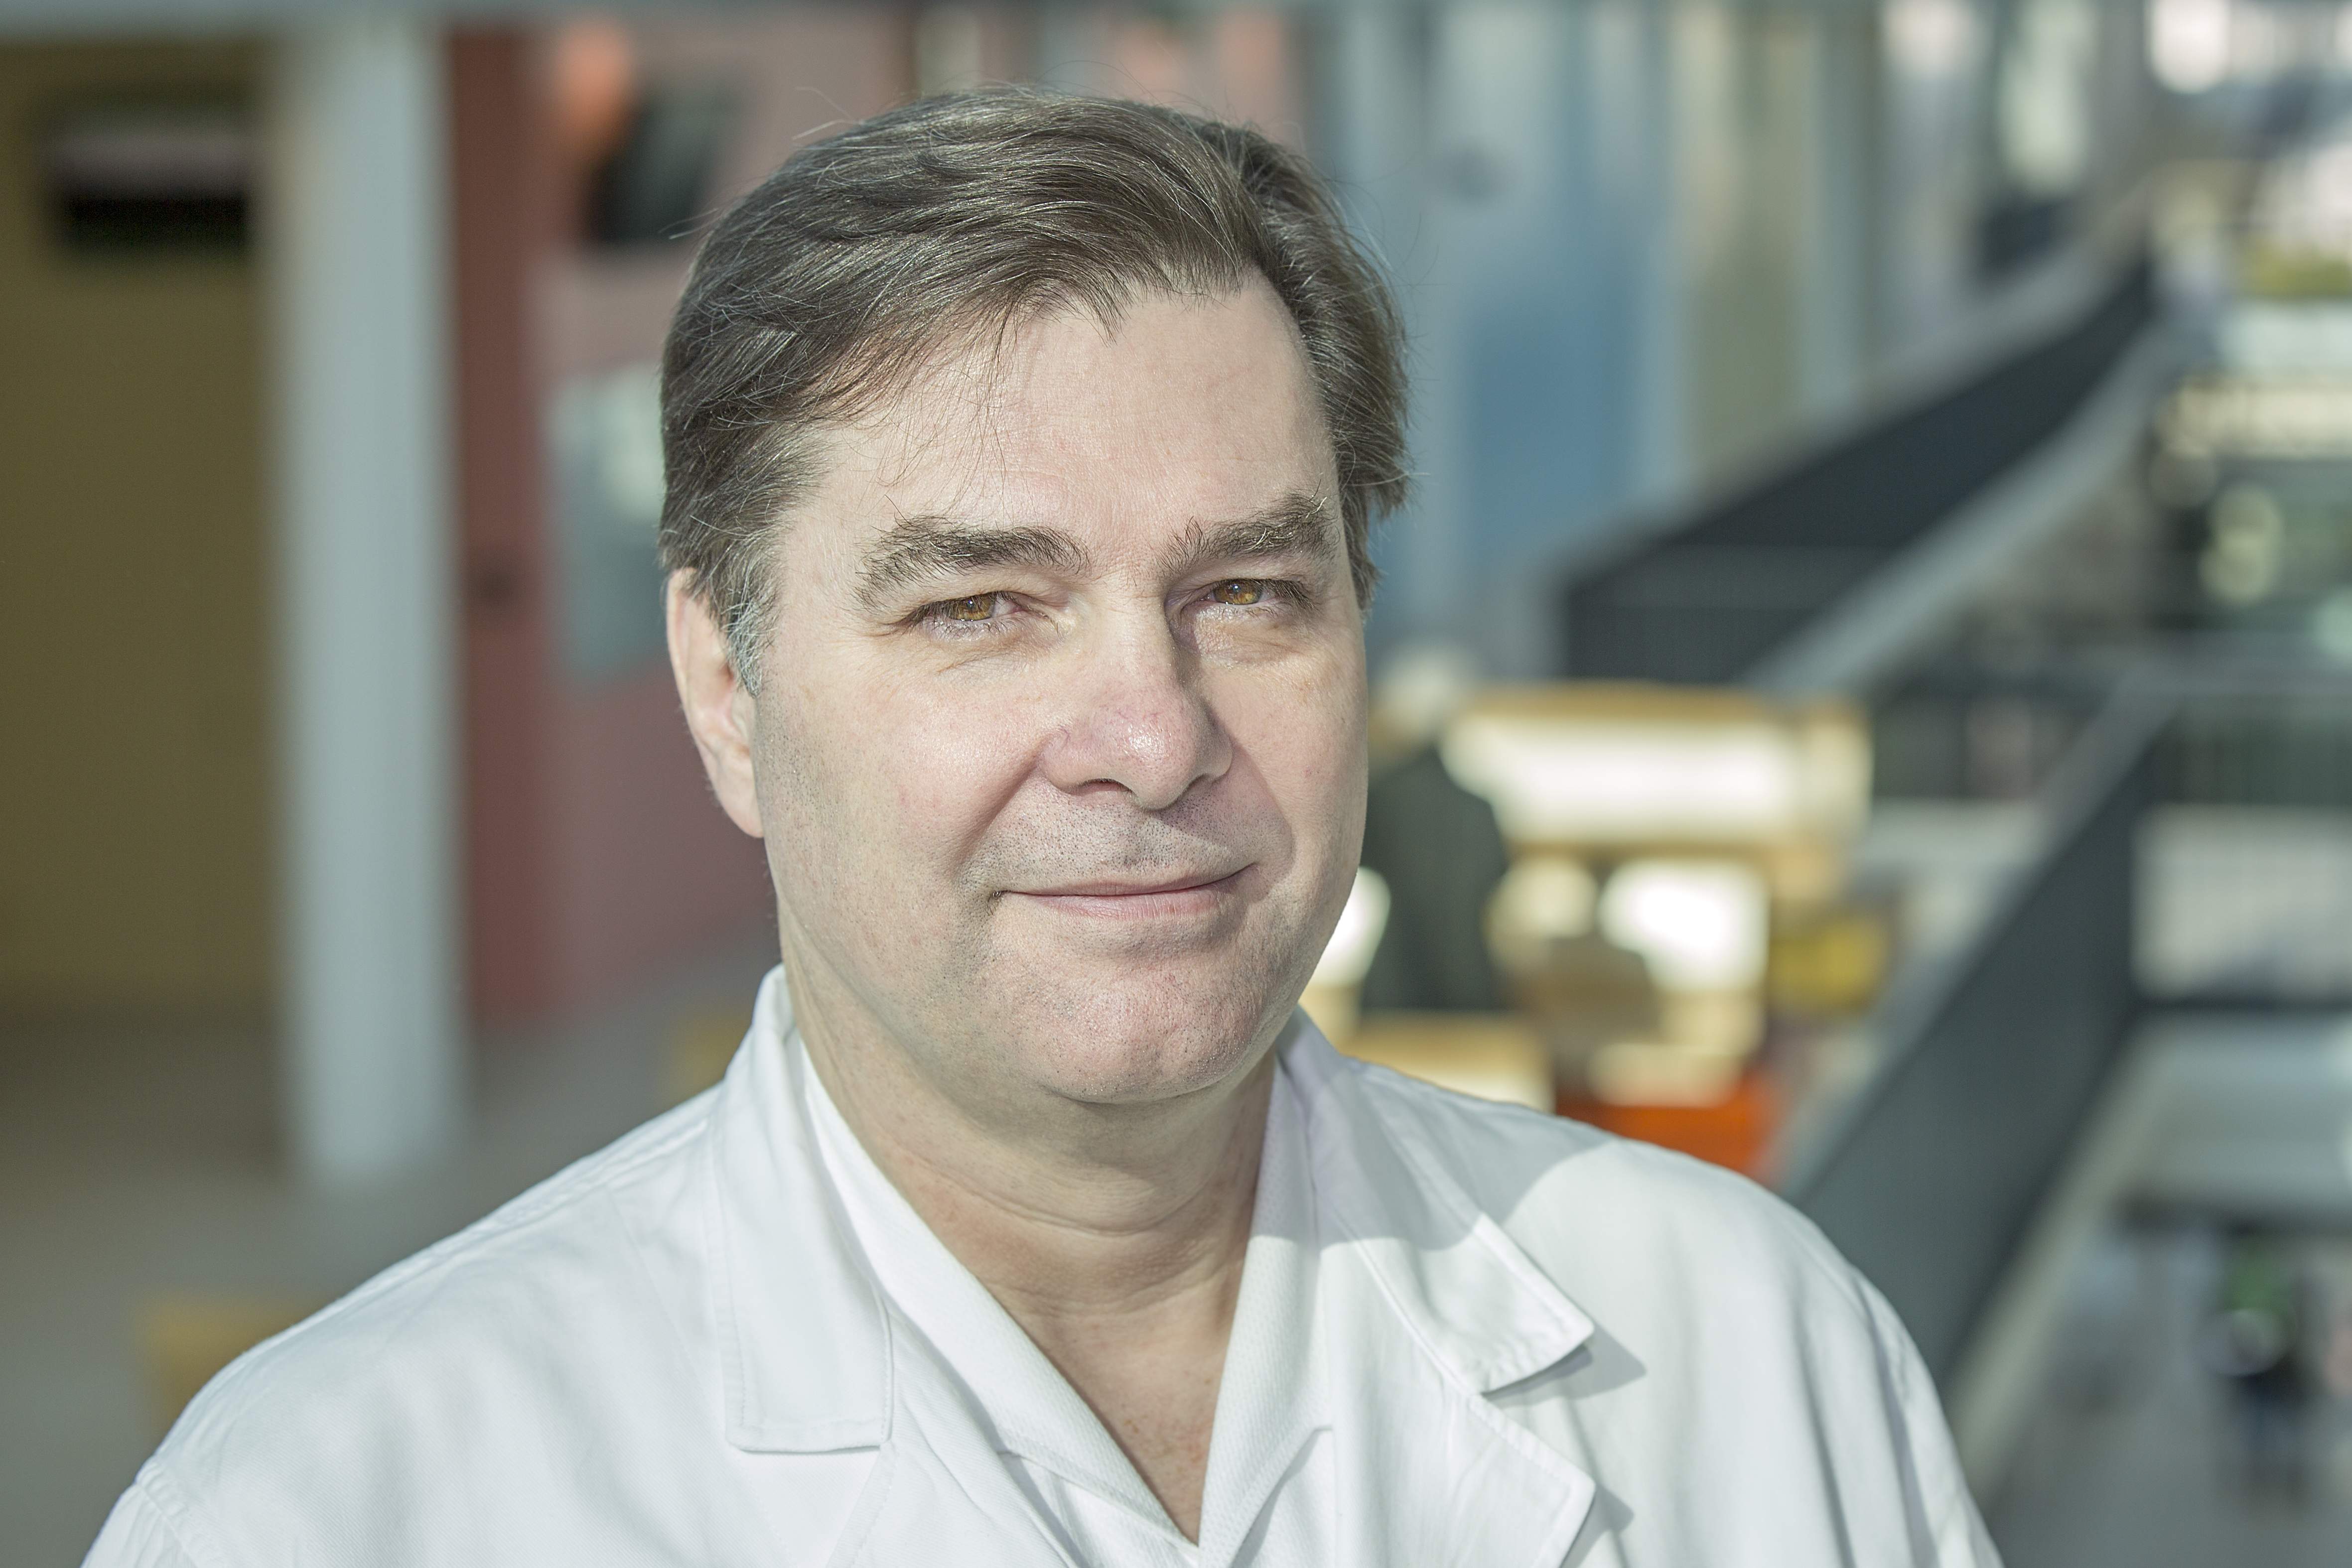 Ao.Univ. Prof. Dr. André Gahleitner, Head of the Clinical Division of Radiology